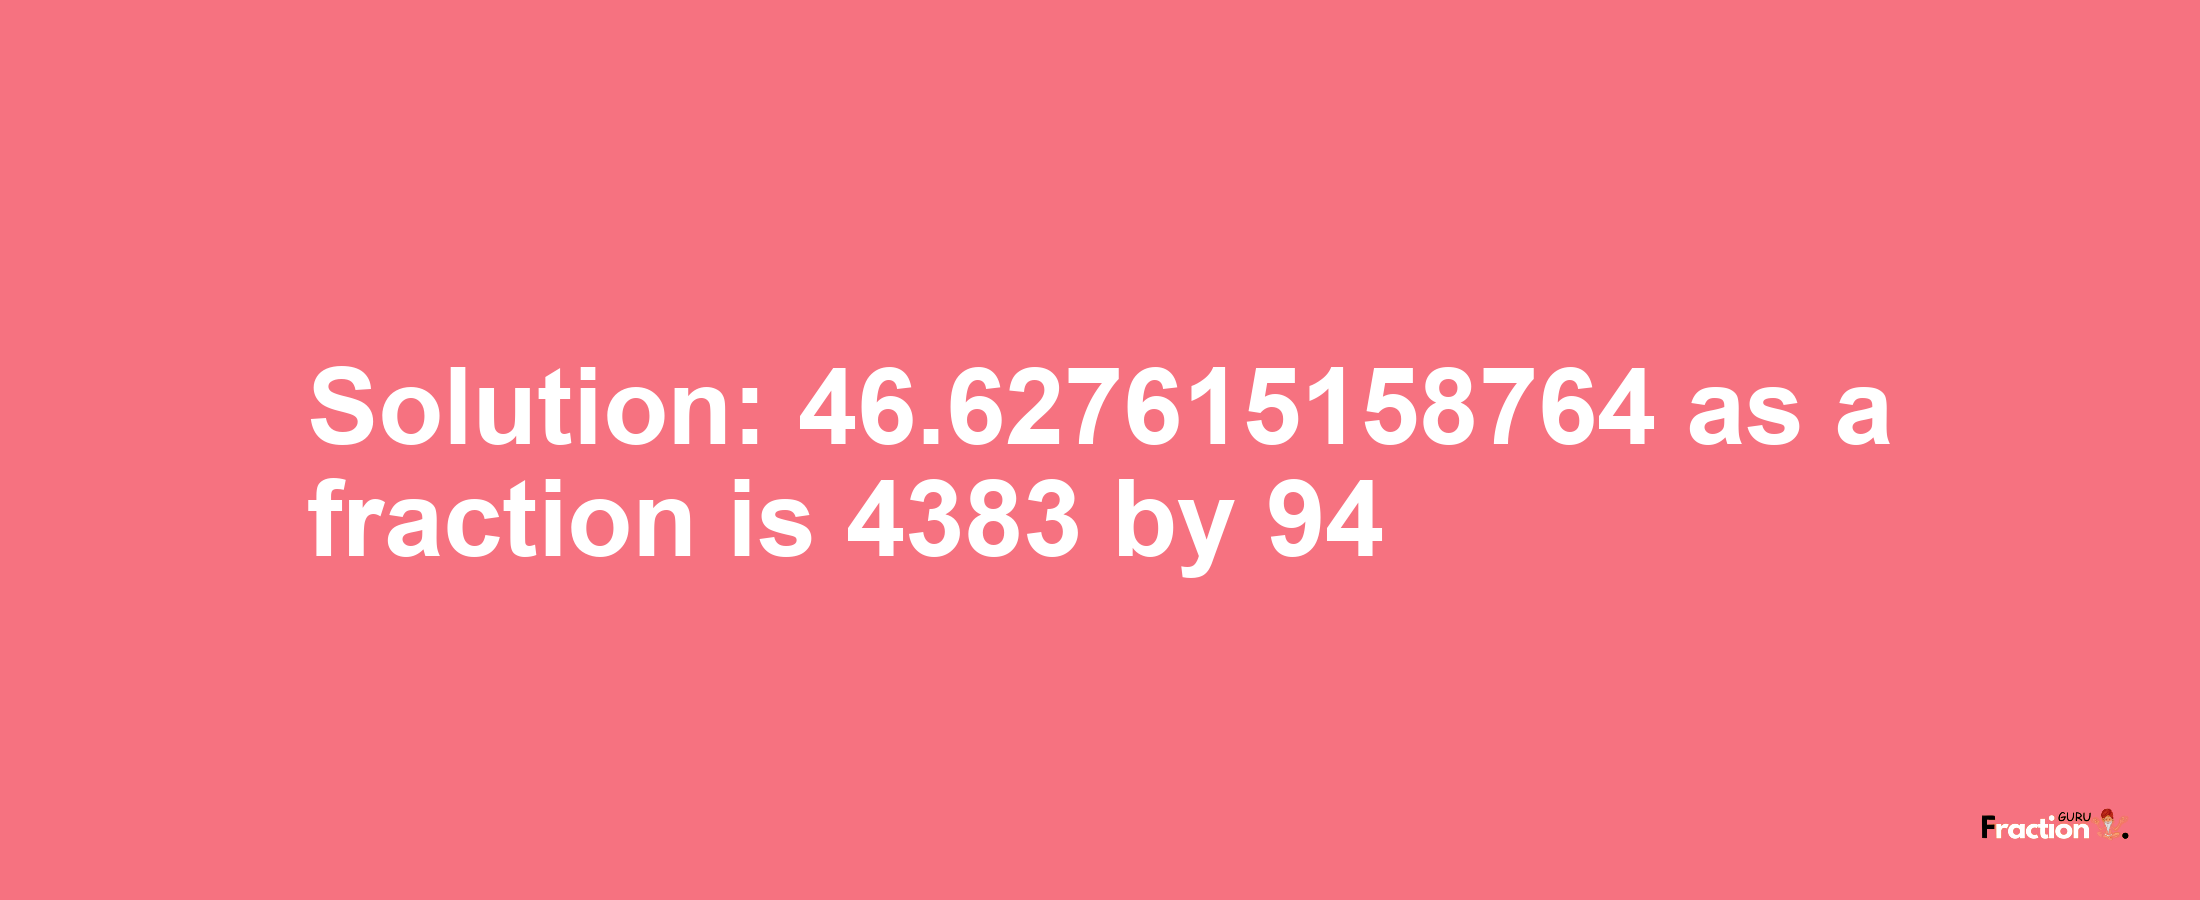 Solution:46.627615158764 as a fraction is 4383/94